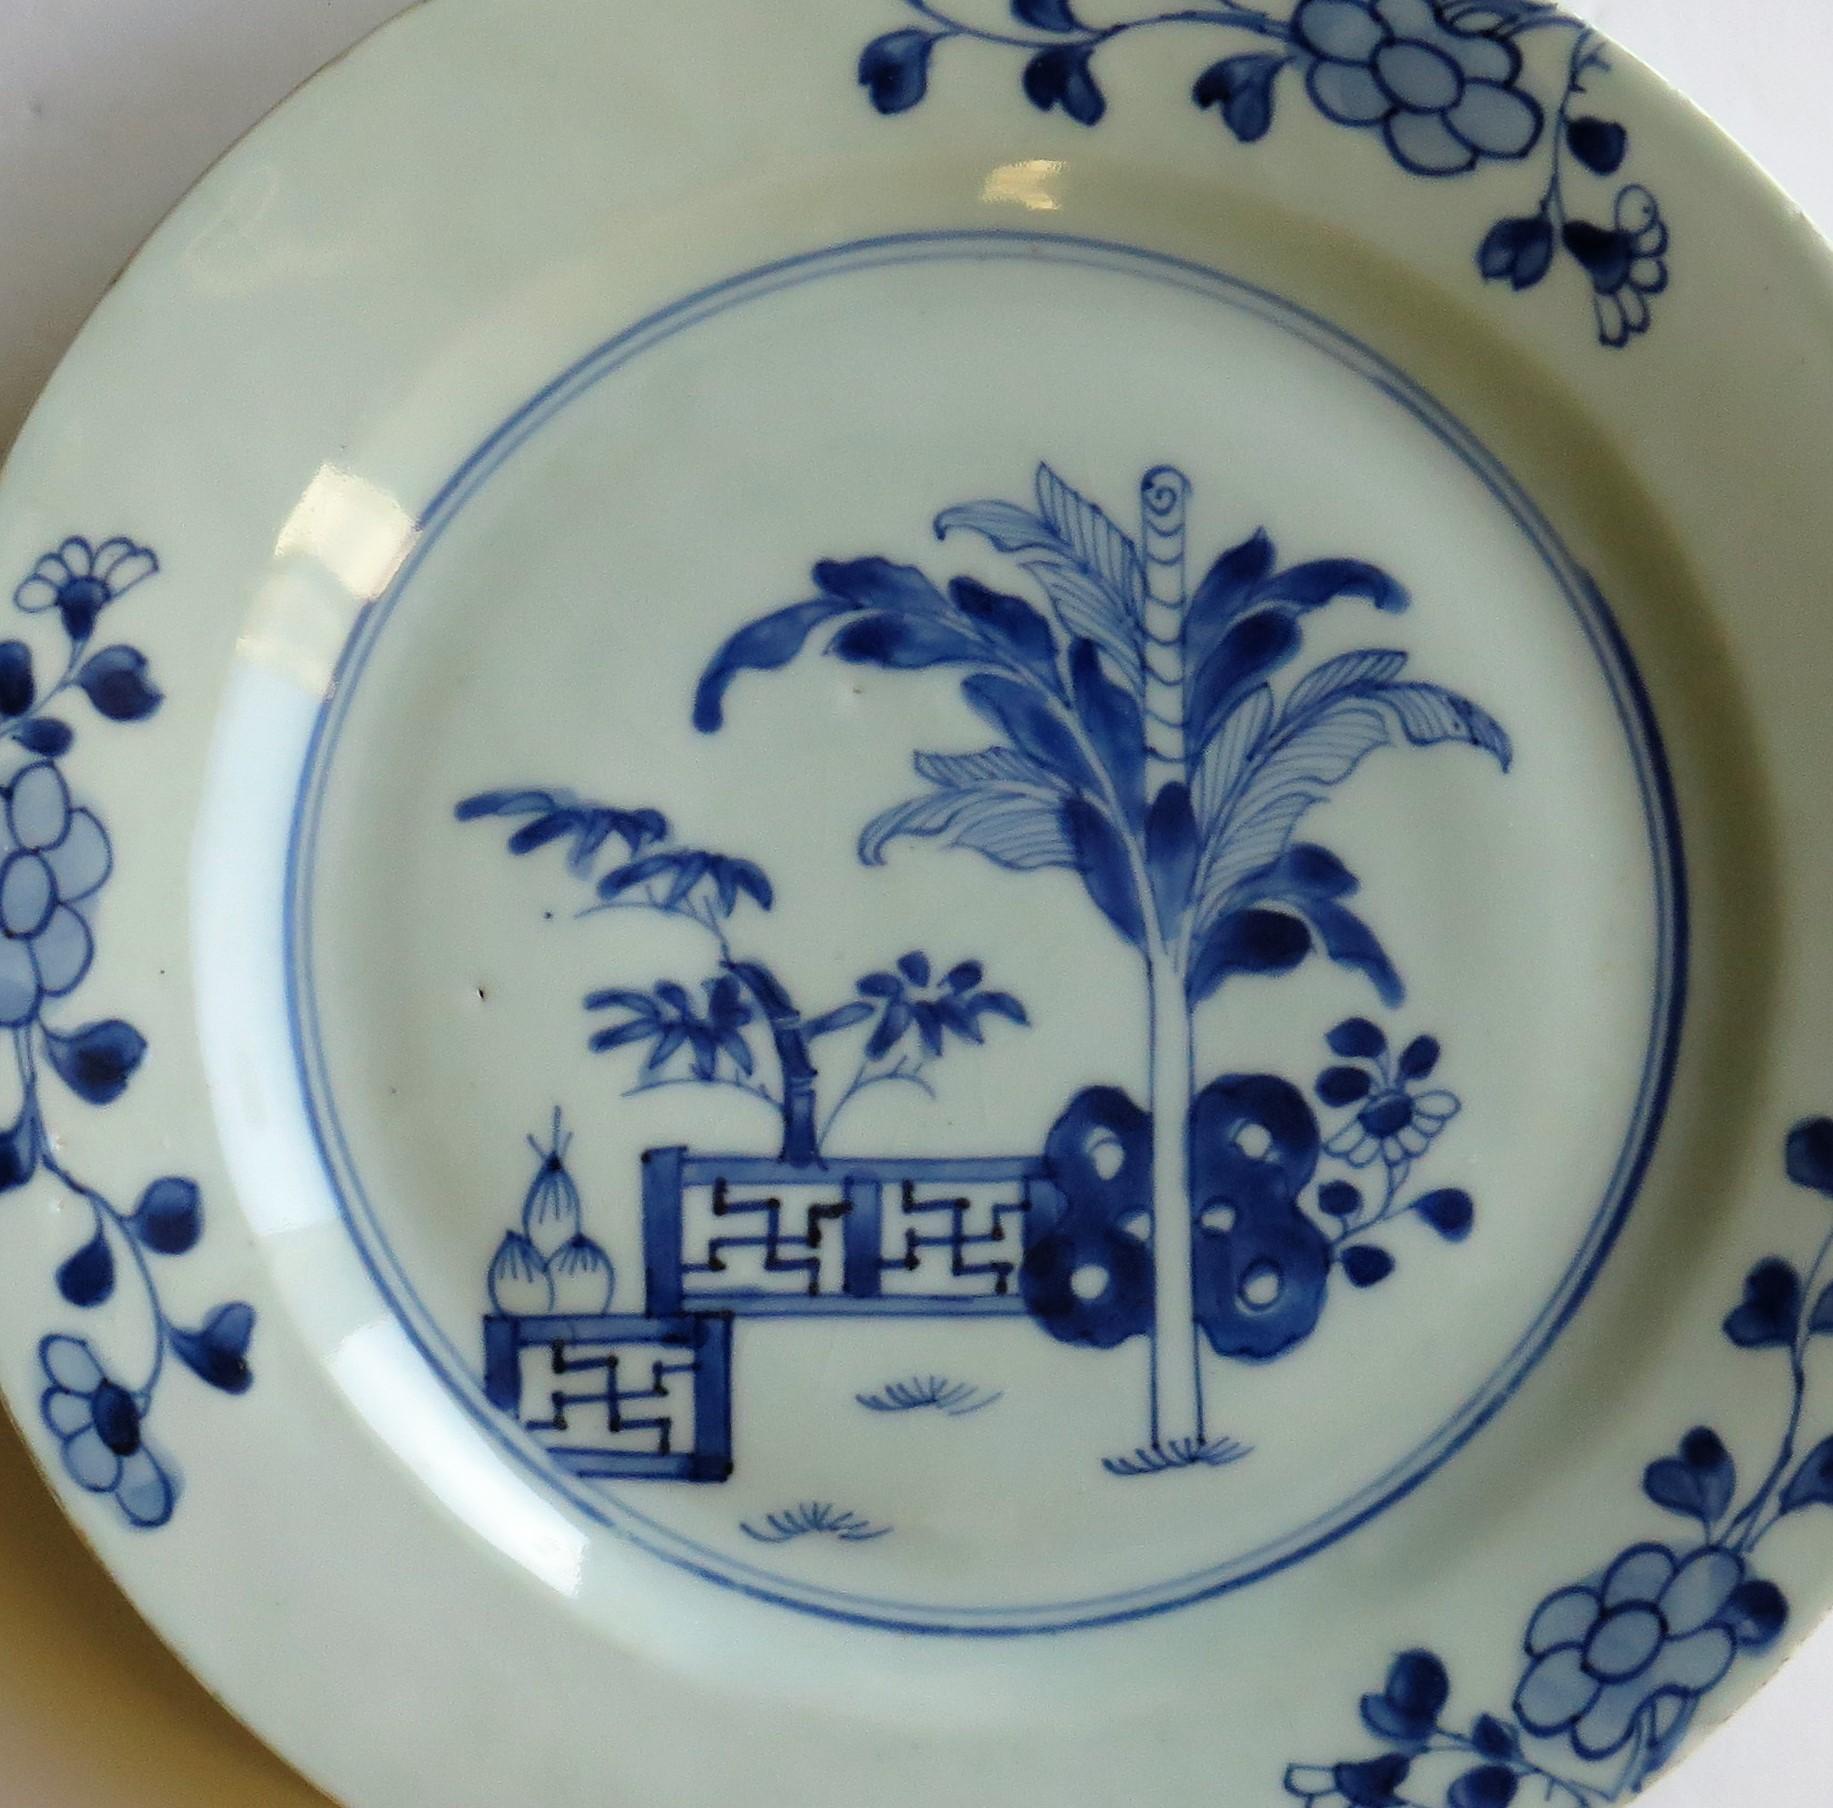 This is a beautiful hand painted blue and white Chinese porcelain plate, dating to the second half of the 18th century, circa 1770, Qing dynasty.

The plate is well potted, and has been hand decorated in a free flowing manner in varying shades of